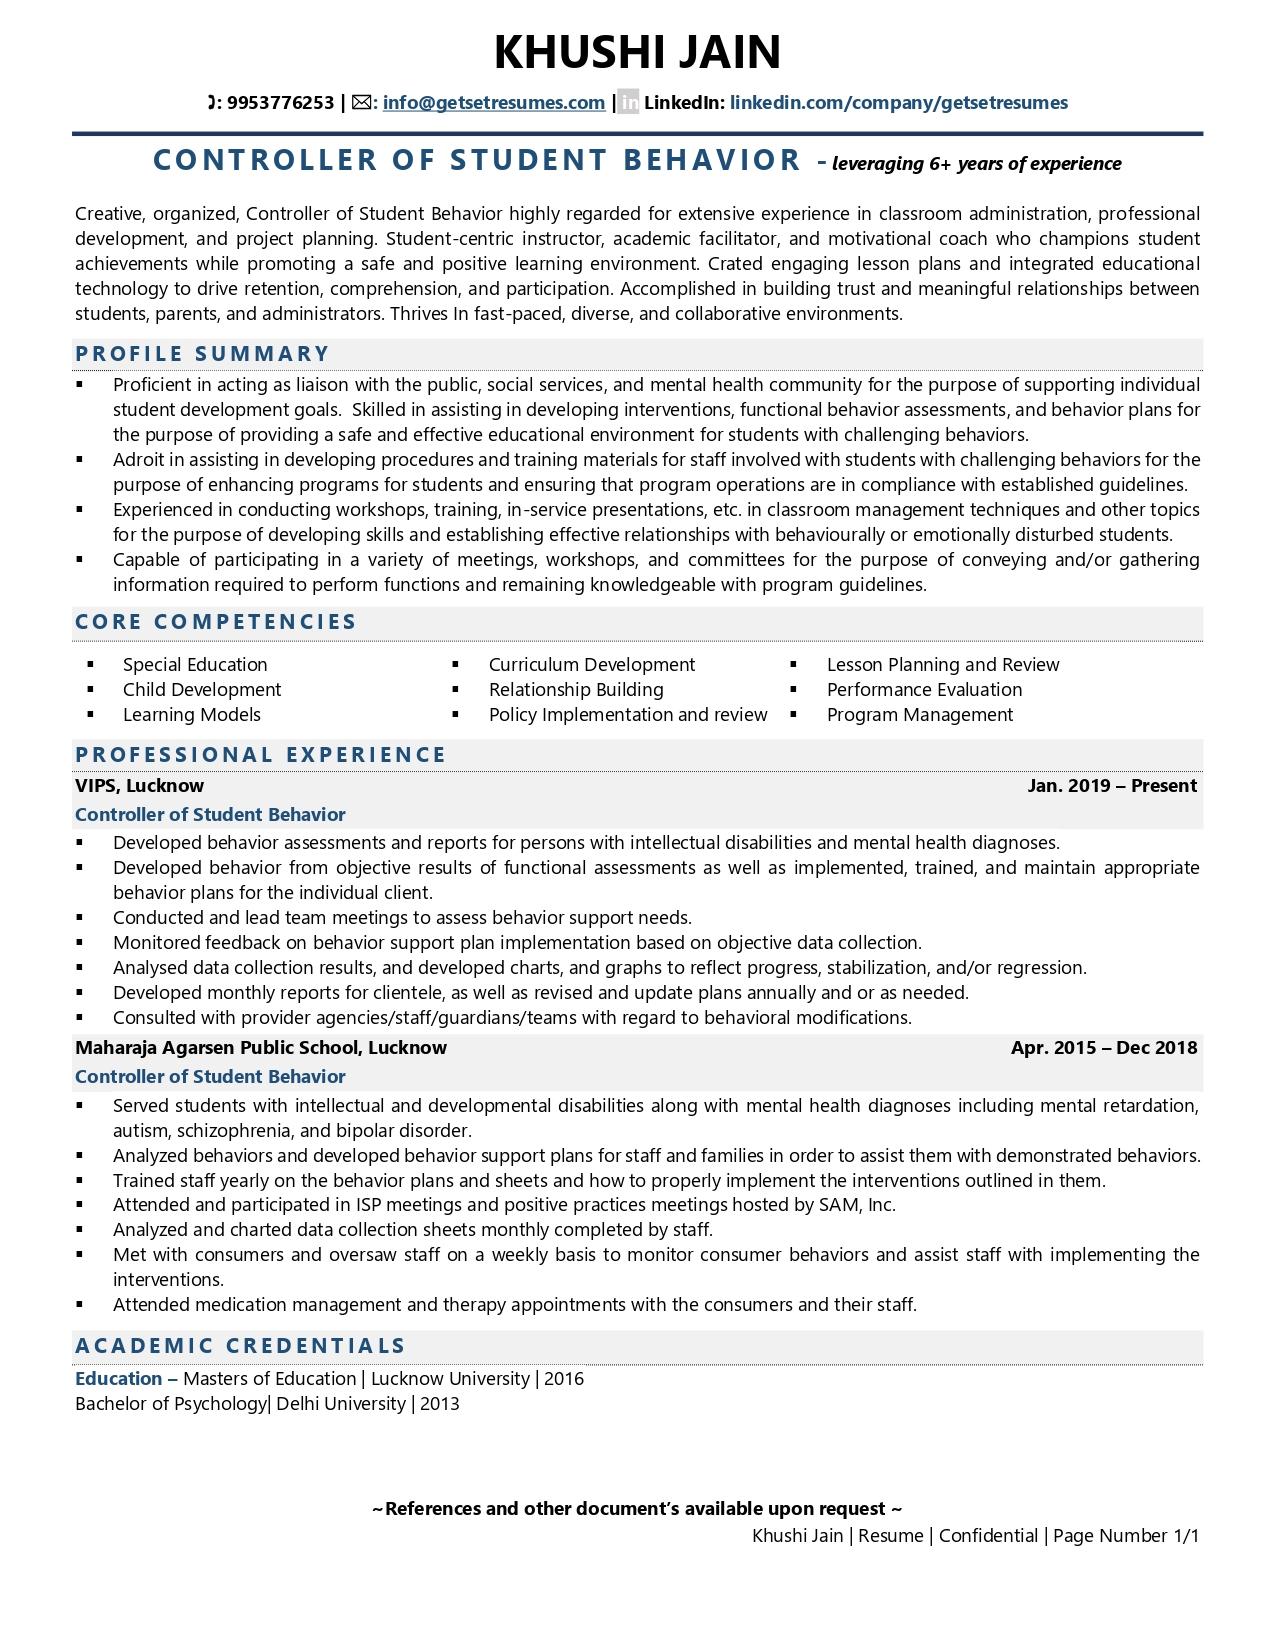 Controller of Student Behaviour - Resume Example & Template